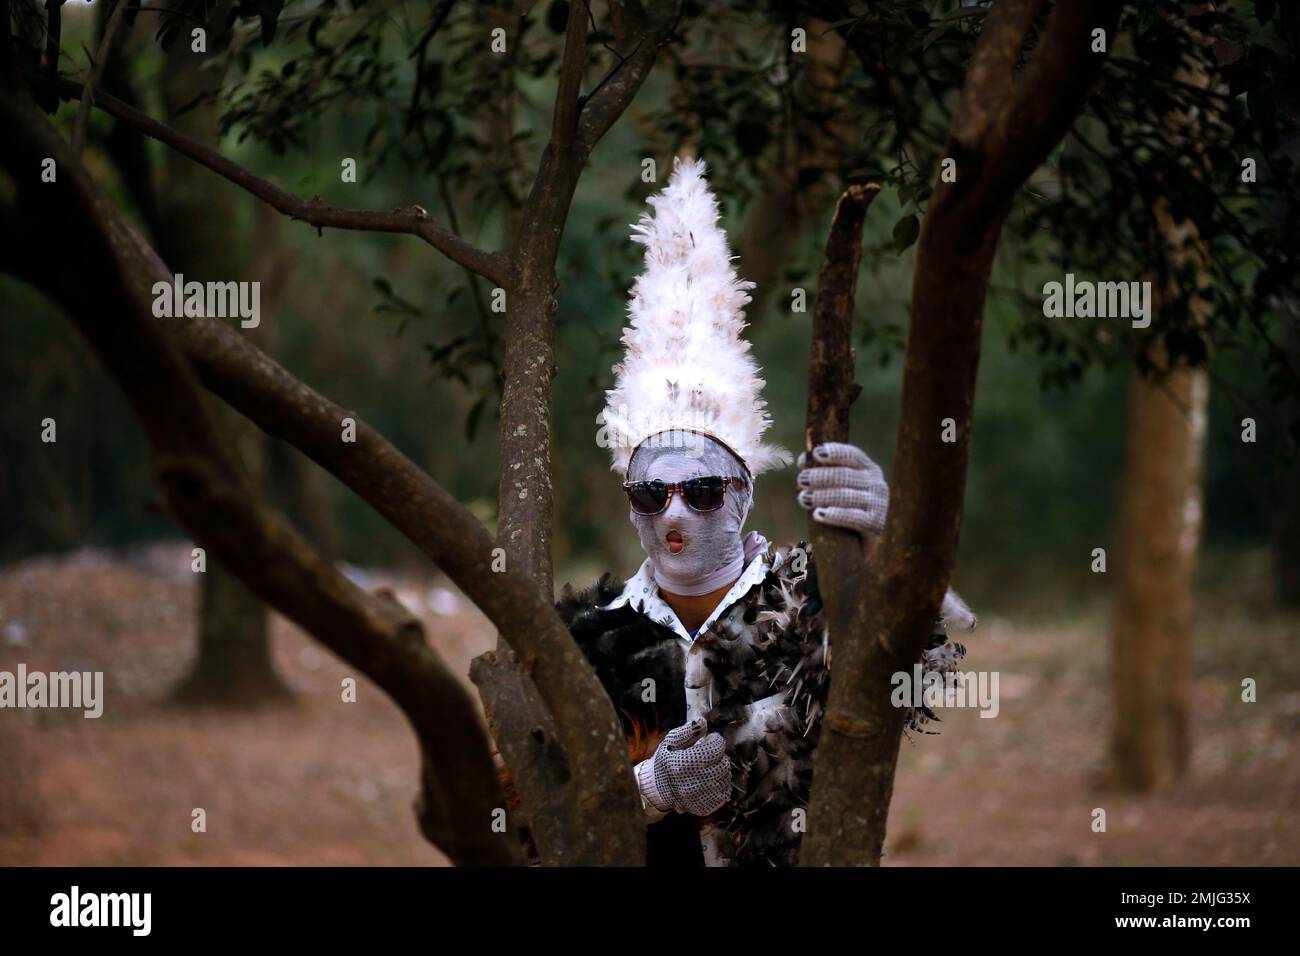 Agustin Armoa poses for a portrait wearing his feathered costume during a  Mass in honor of St. Francis Solano in Emboscada, Paraguay, Wednesday, July  24, 2019. Armoa has been a devotee for